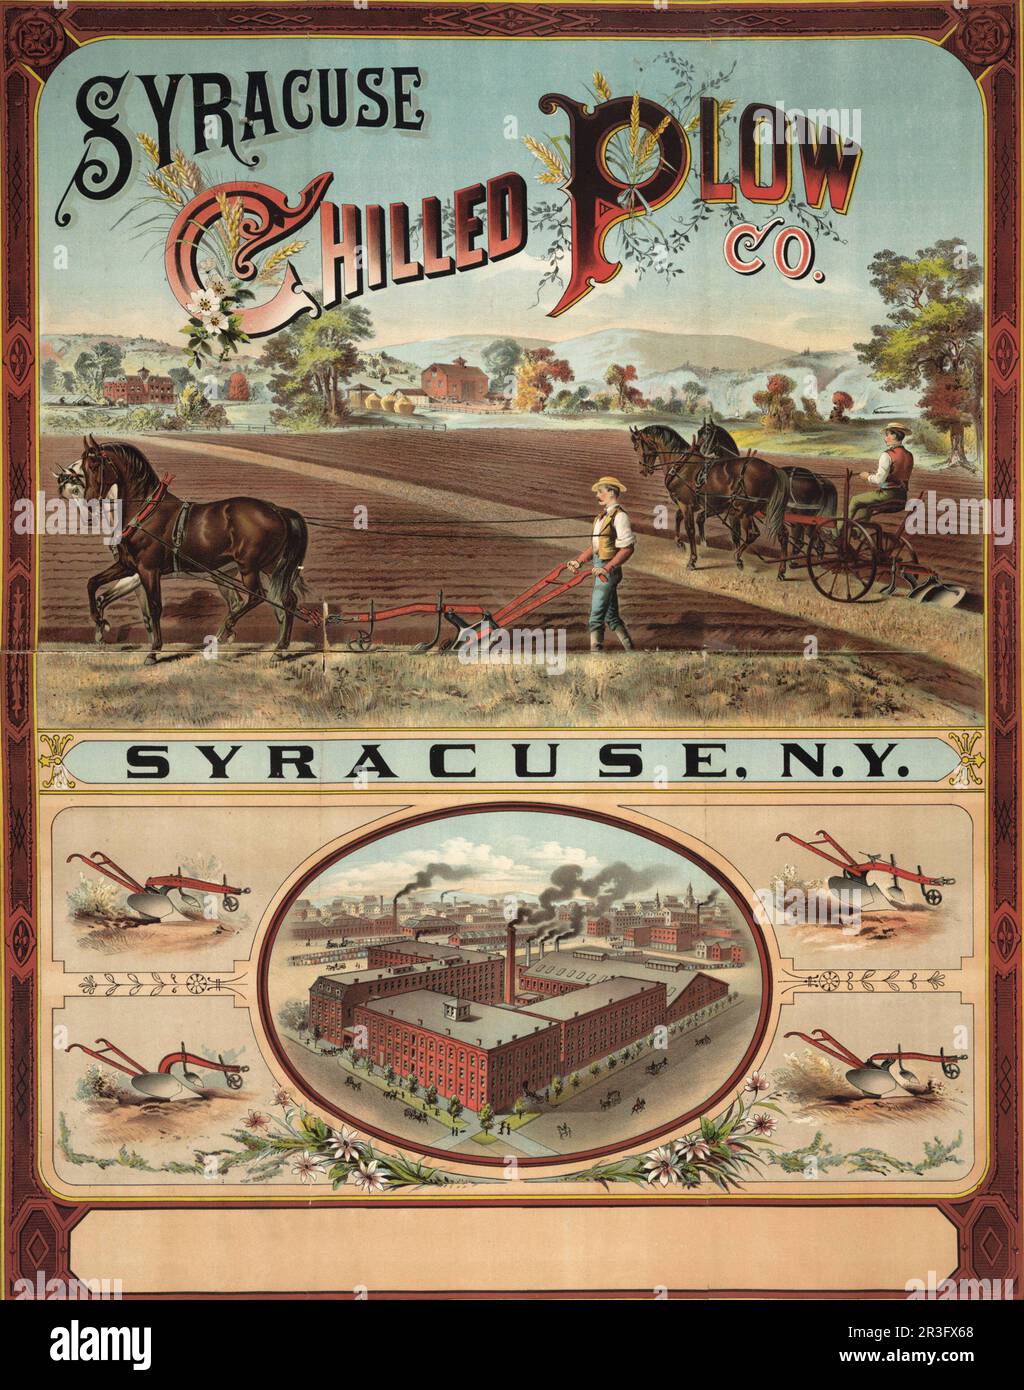 Vintage advertisement for Syracuse Chilled Plow Company. Stock Photo